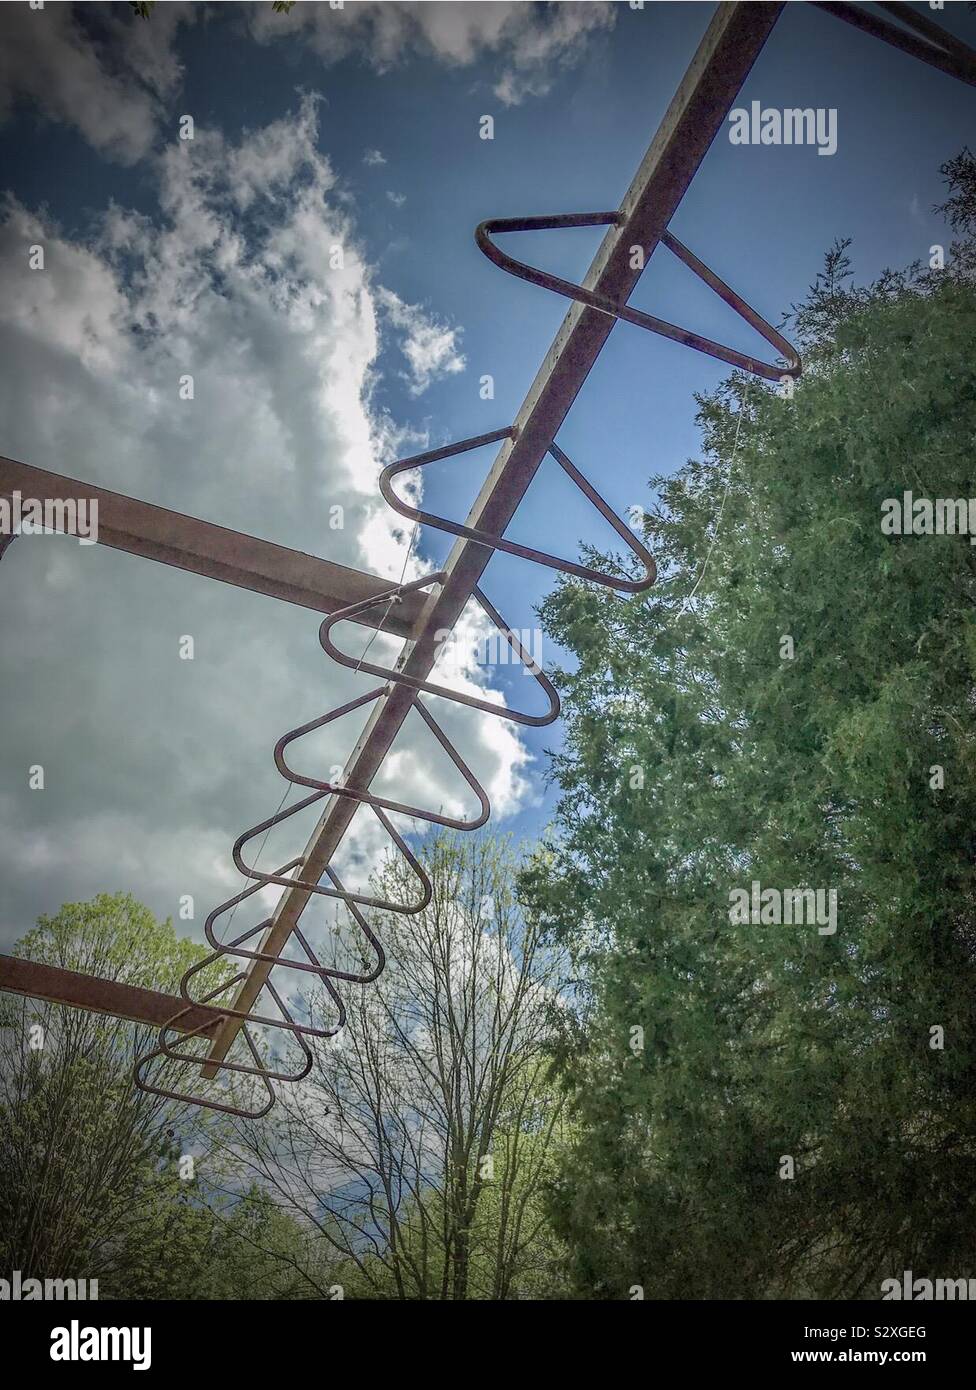 Overhand bars, sky, and trees in playground Stock Photo